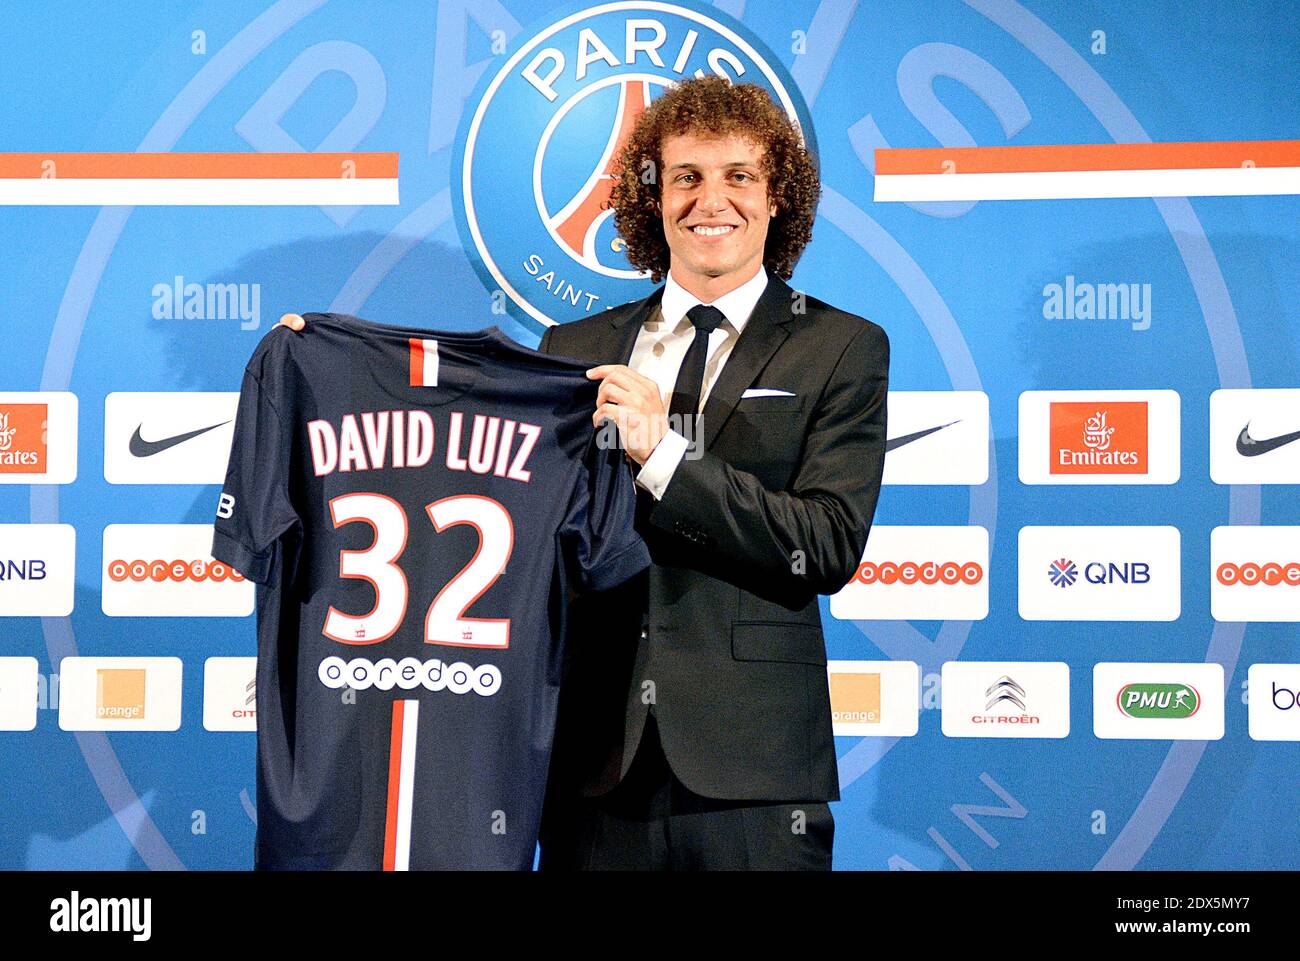 PSG (Paris Saint-Germain) newly recruited Brazilian defender David Luiz  holds his new jersey during his official presentation at hotel Peninsula in  Paris, France on August 7, 2014. Luiz, aged 27, signed in